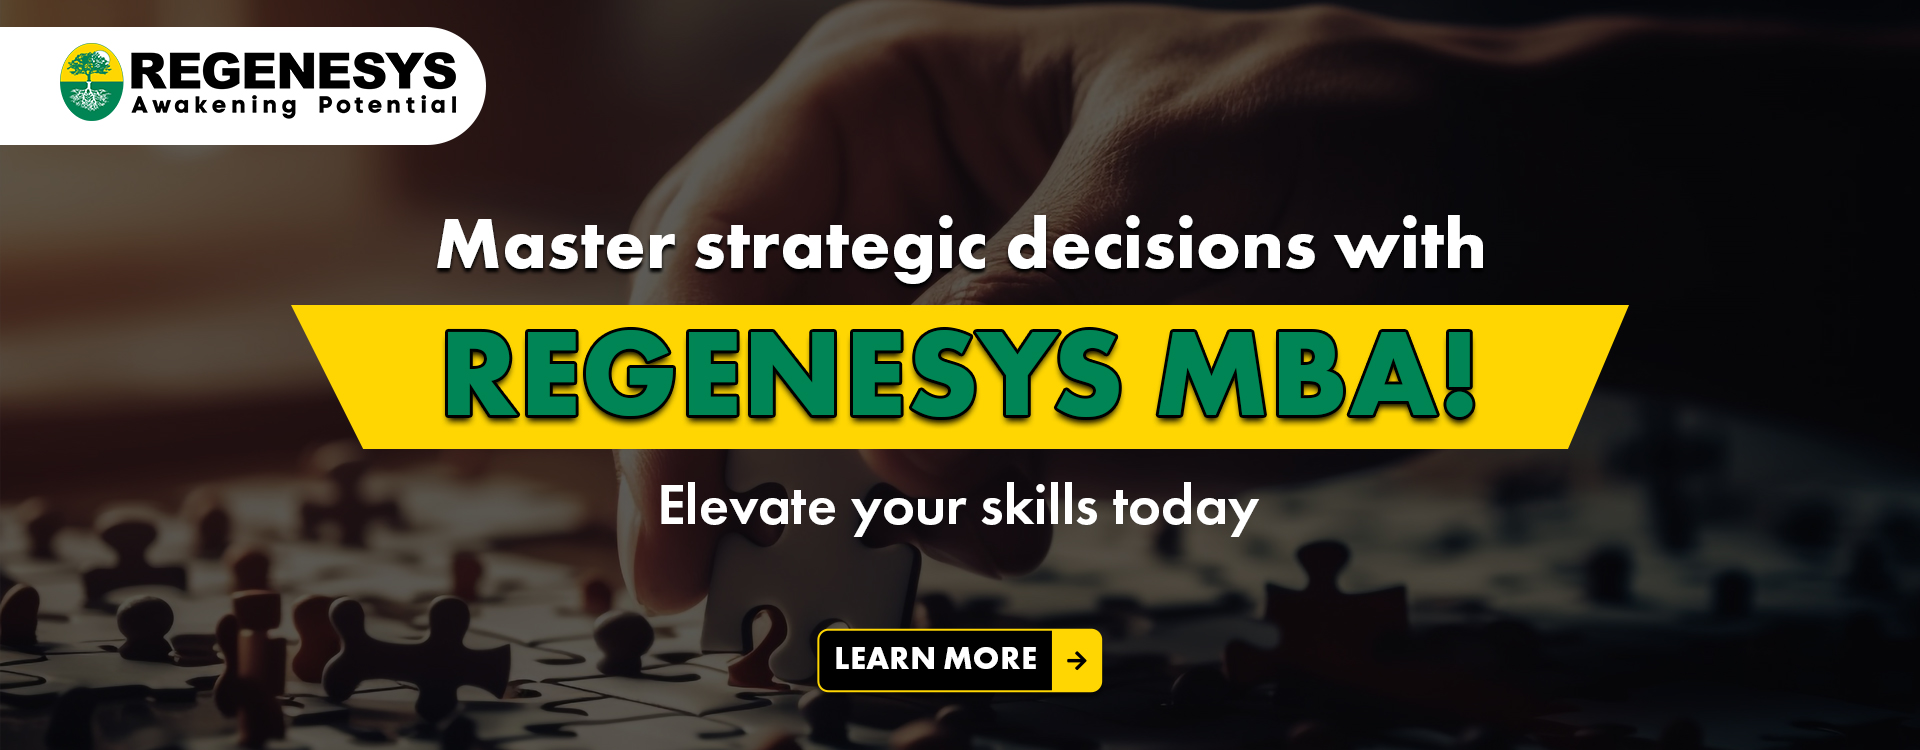 Master strategic decisions with Regenesys MBA. | Elevate your skills today.